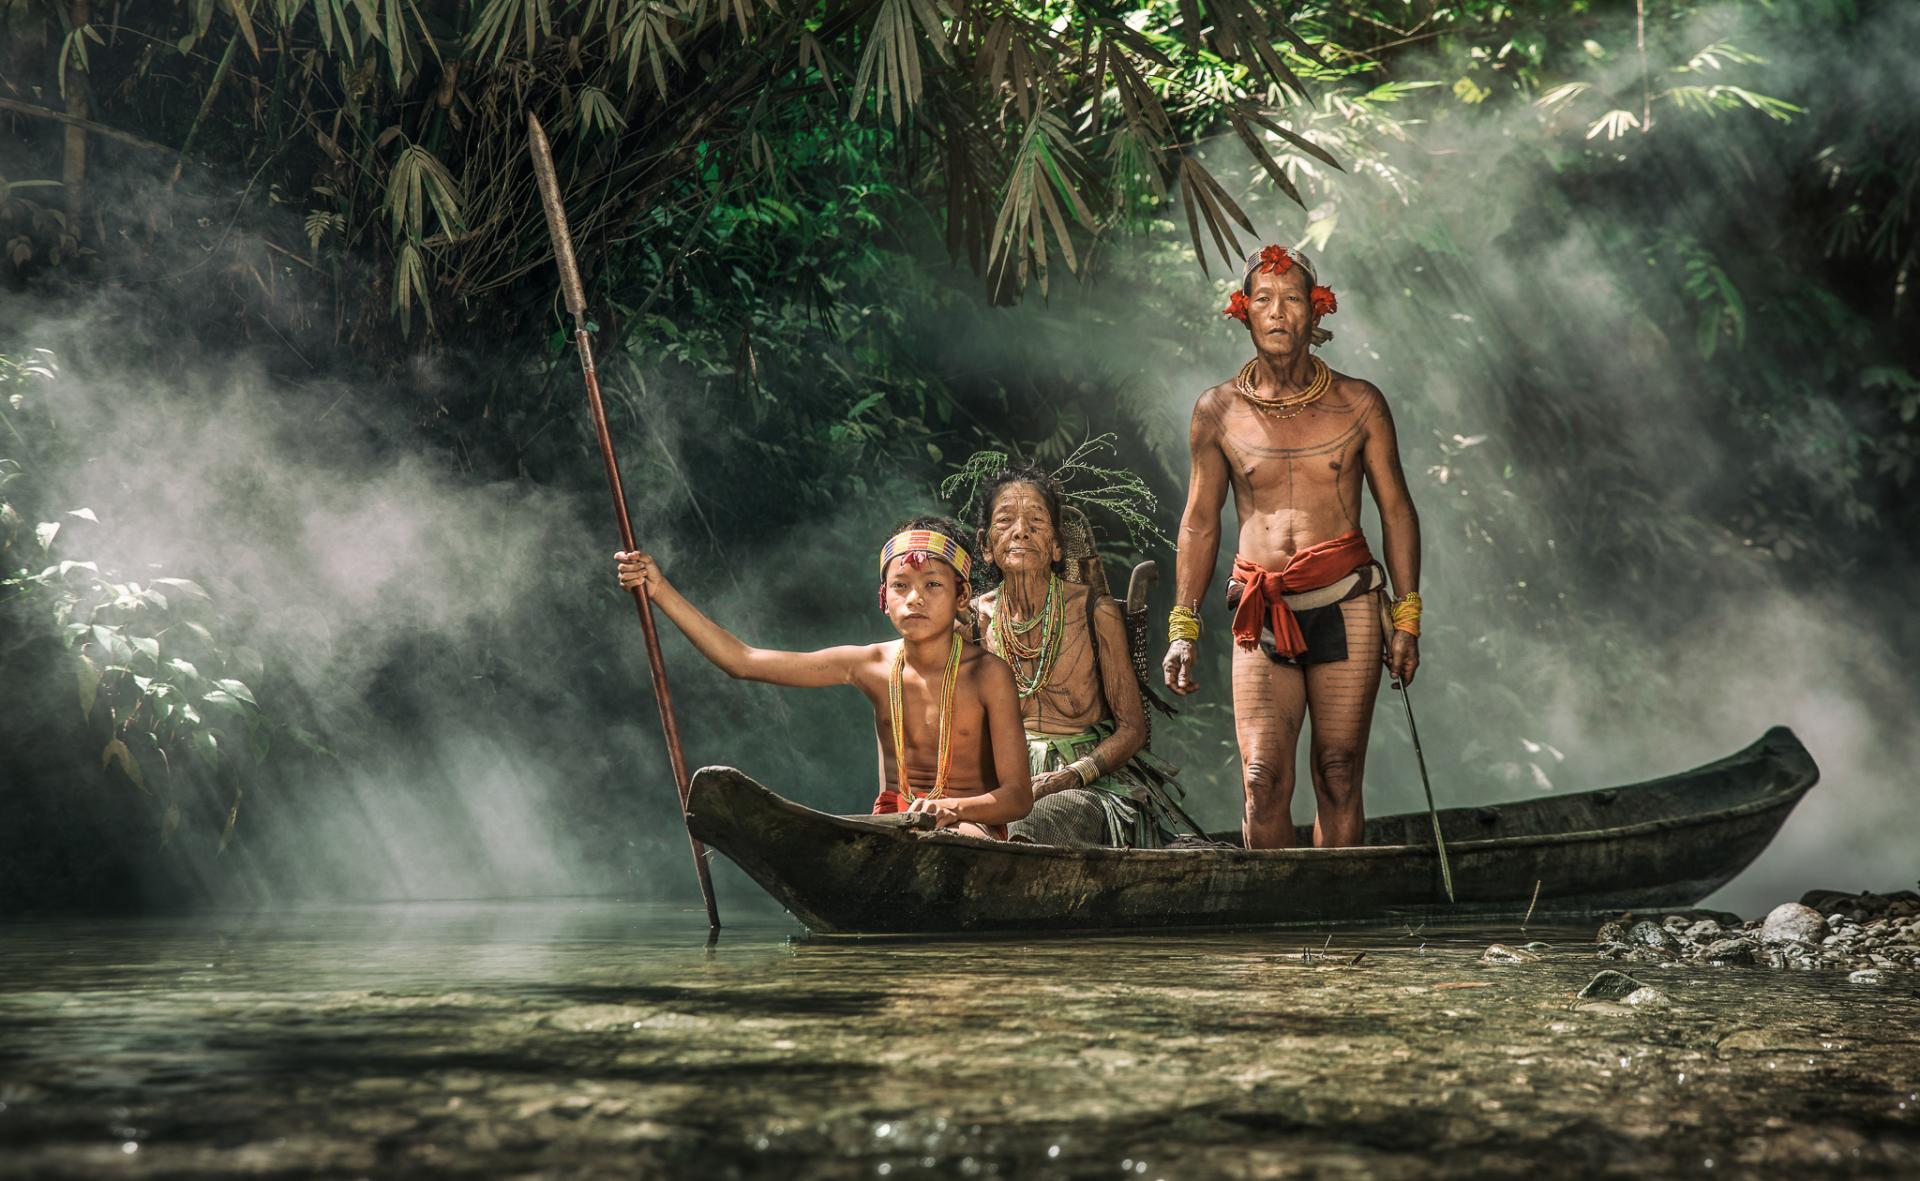 European Photography Awards Winner - Mentawei: Keepers of the forest